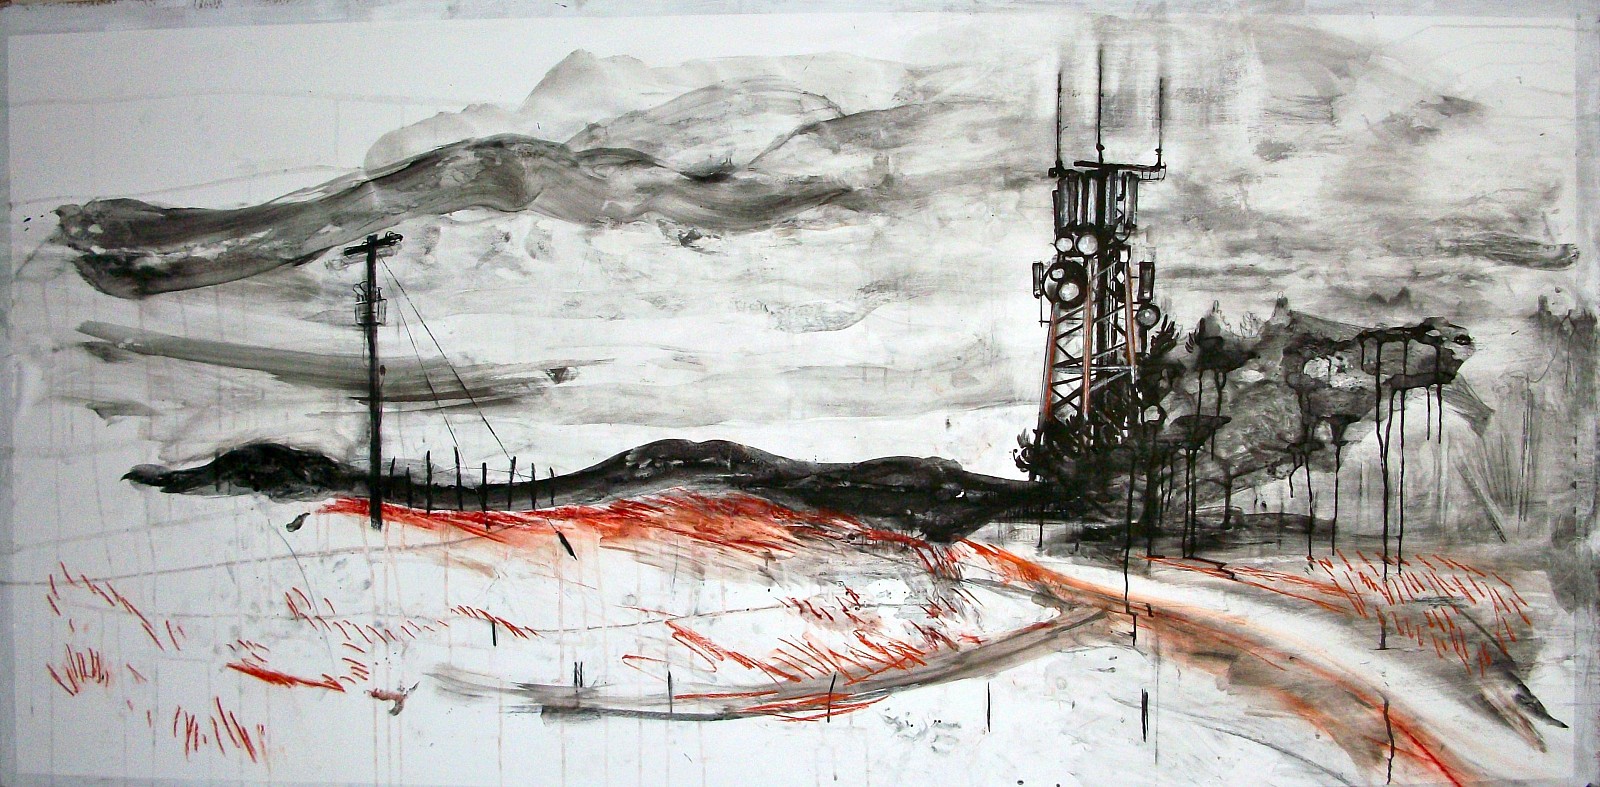 Andy Parsons
Landscape With Mobile Mast, 2011-12
charcoal, chalk, ink, conte crayon on gessoed paper, 48 x 106 in.